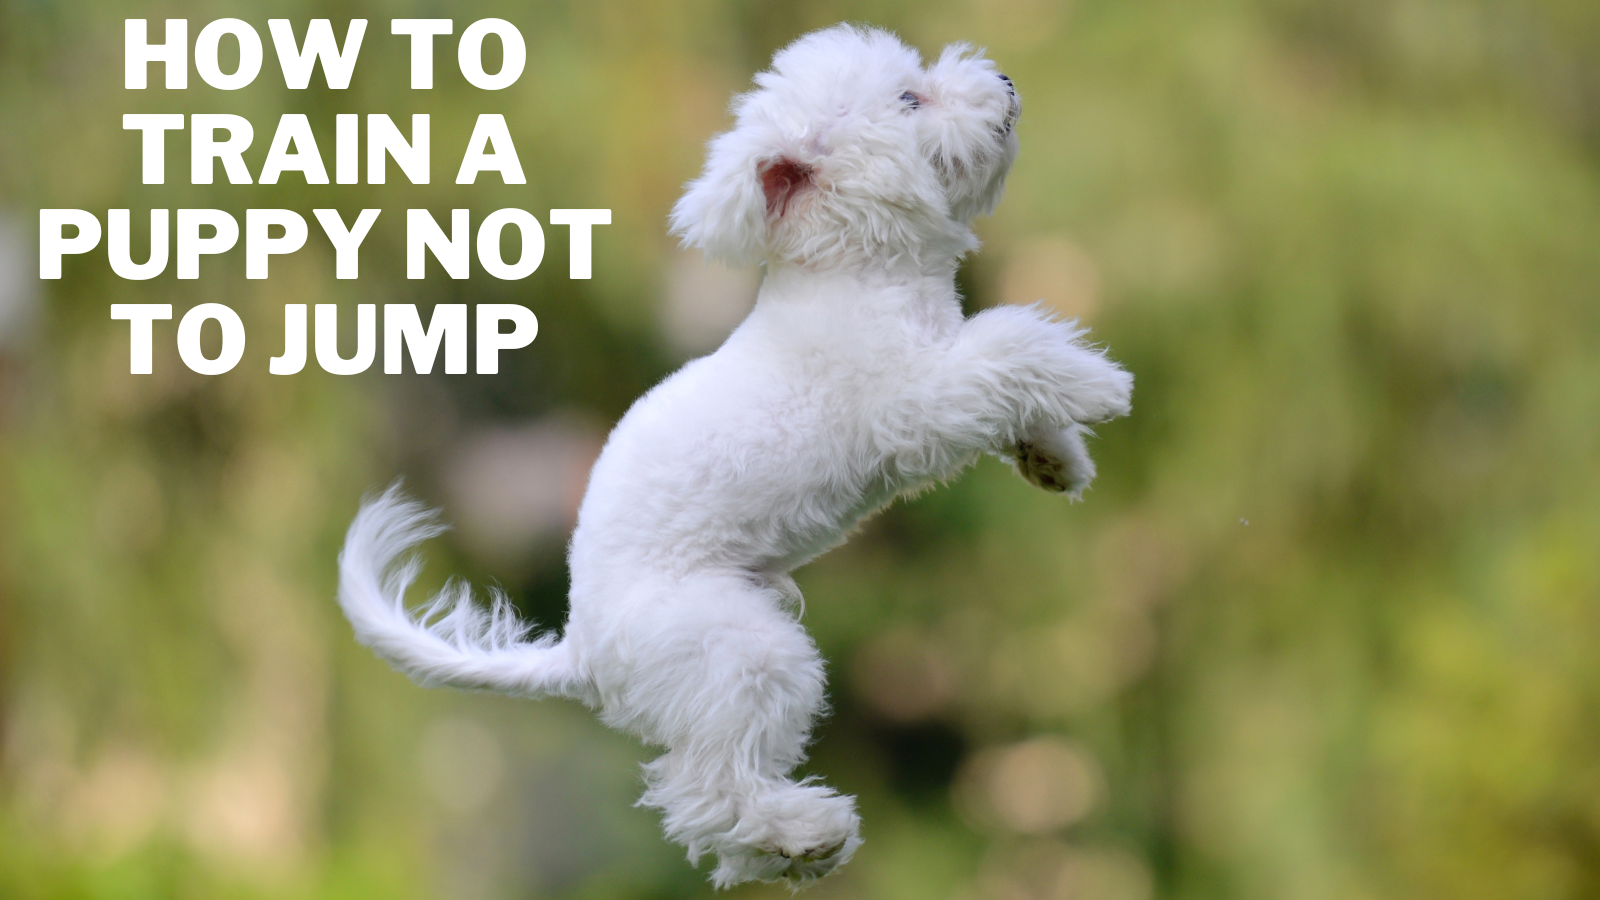 How To Train A Puppy Not To Jump